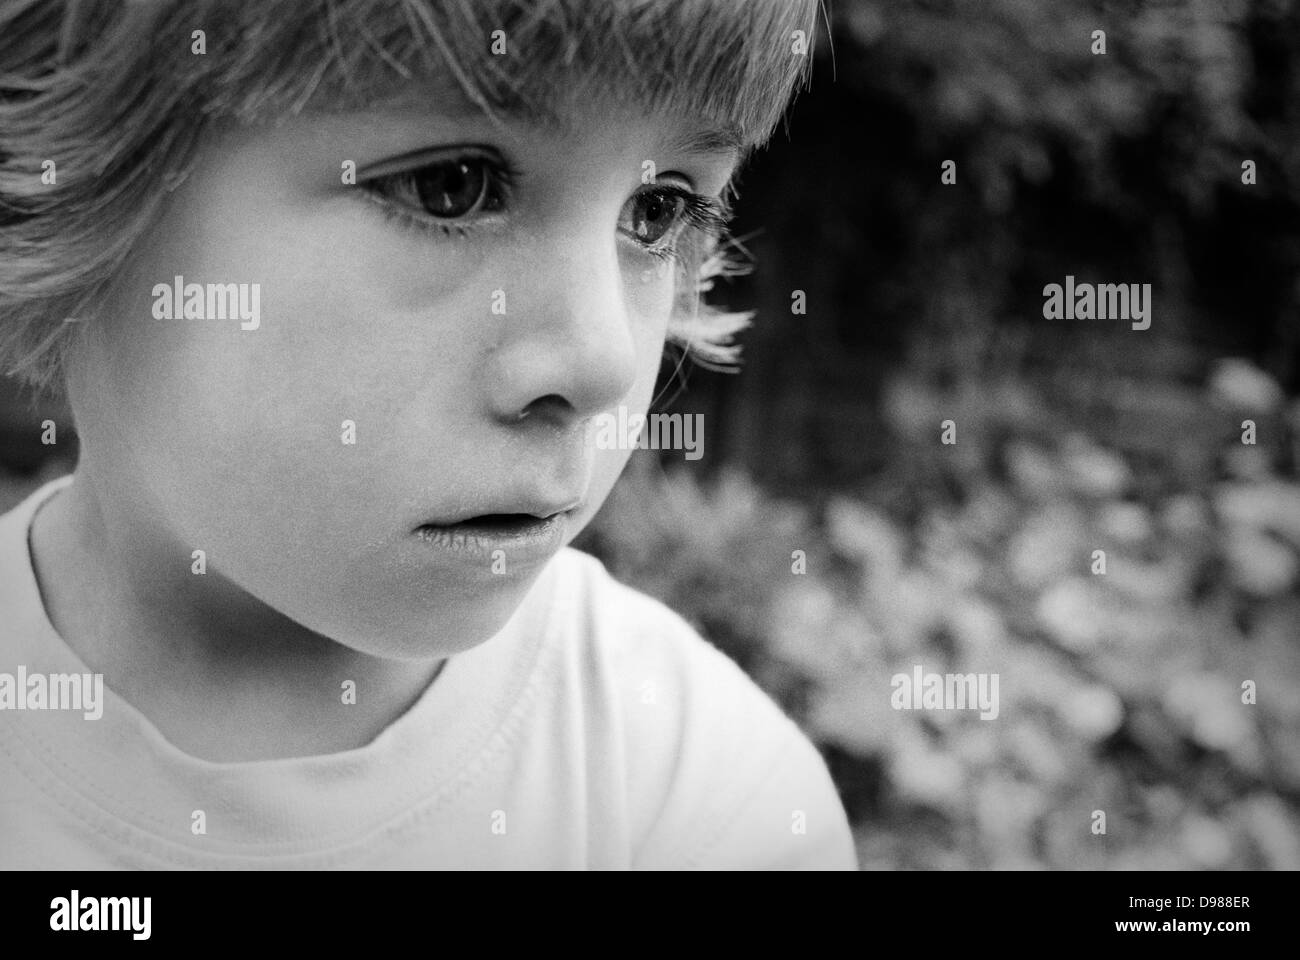 A 4 year-old girl sheds a tear during an emotional moment while playing in her back garden. Seen in close-up detail we see a tear creeping down her right eye and another making its way down her left cheek - her large eyes looking sad and upset. Stock Photo